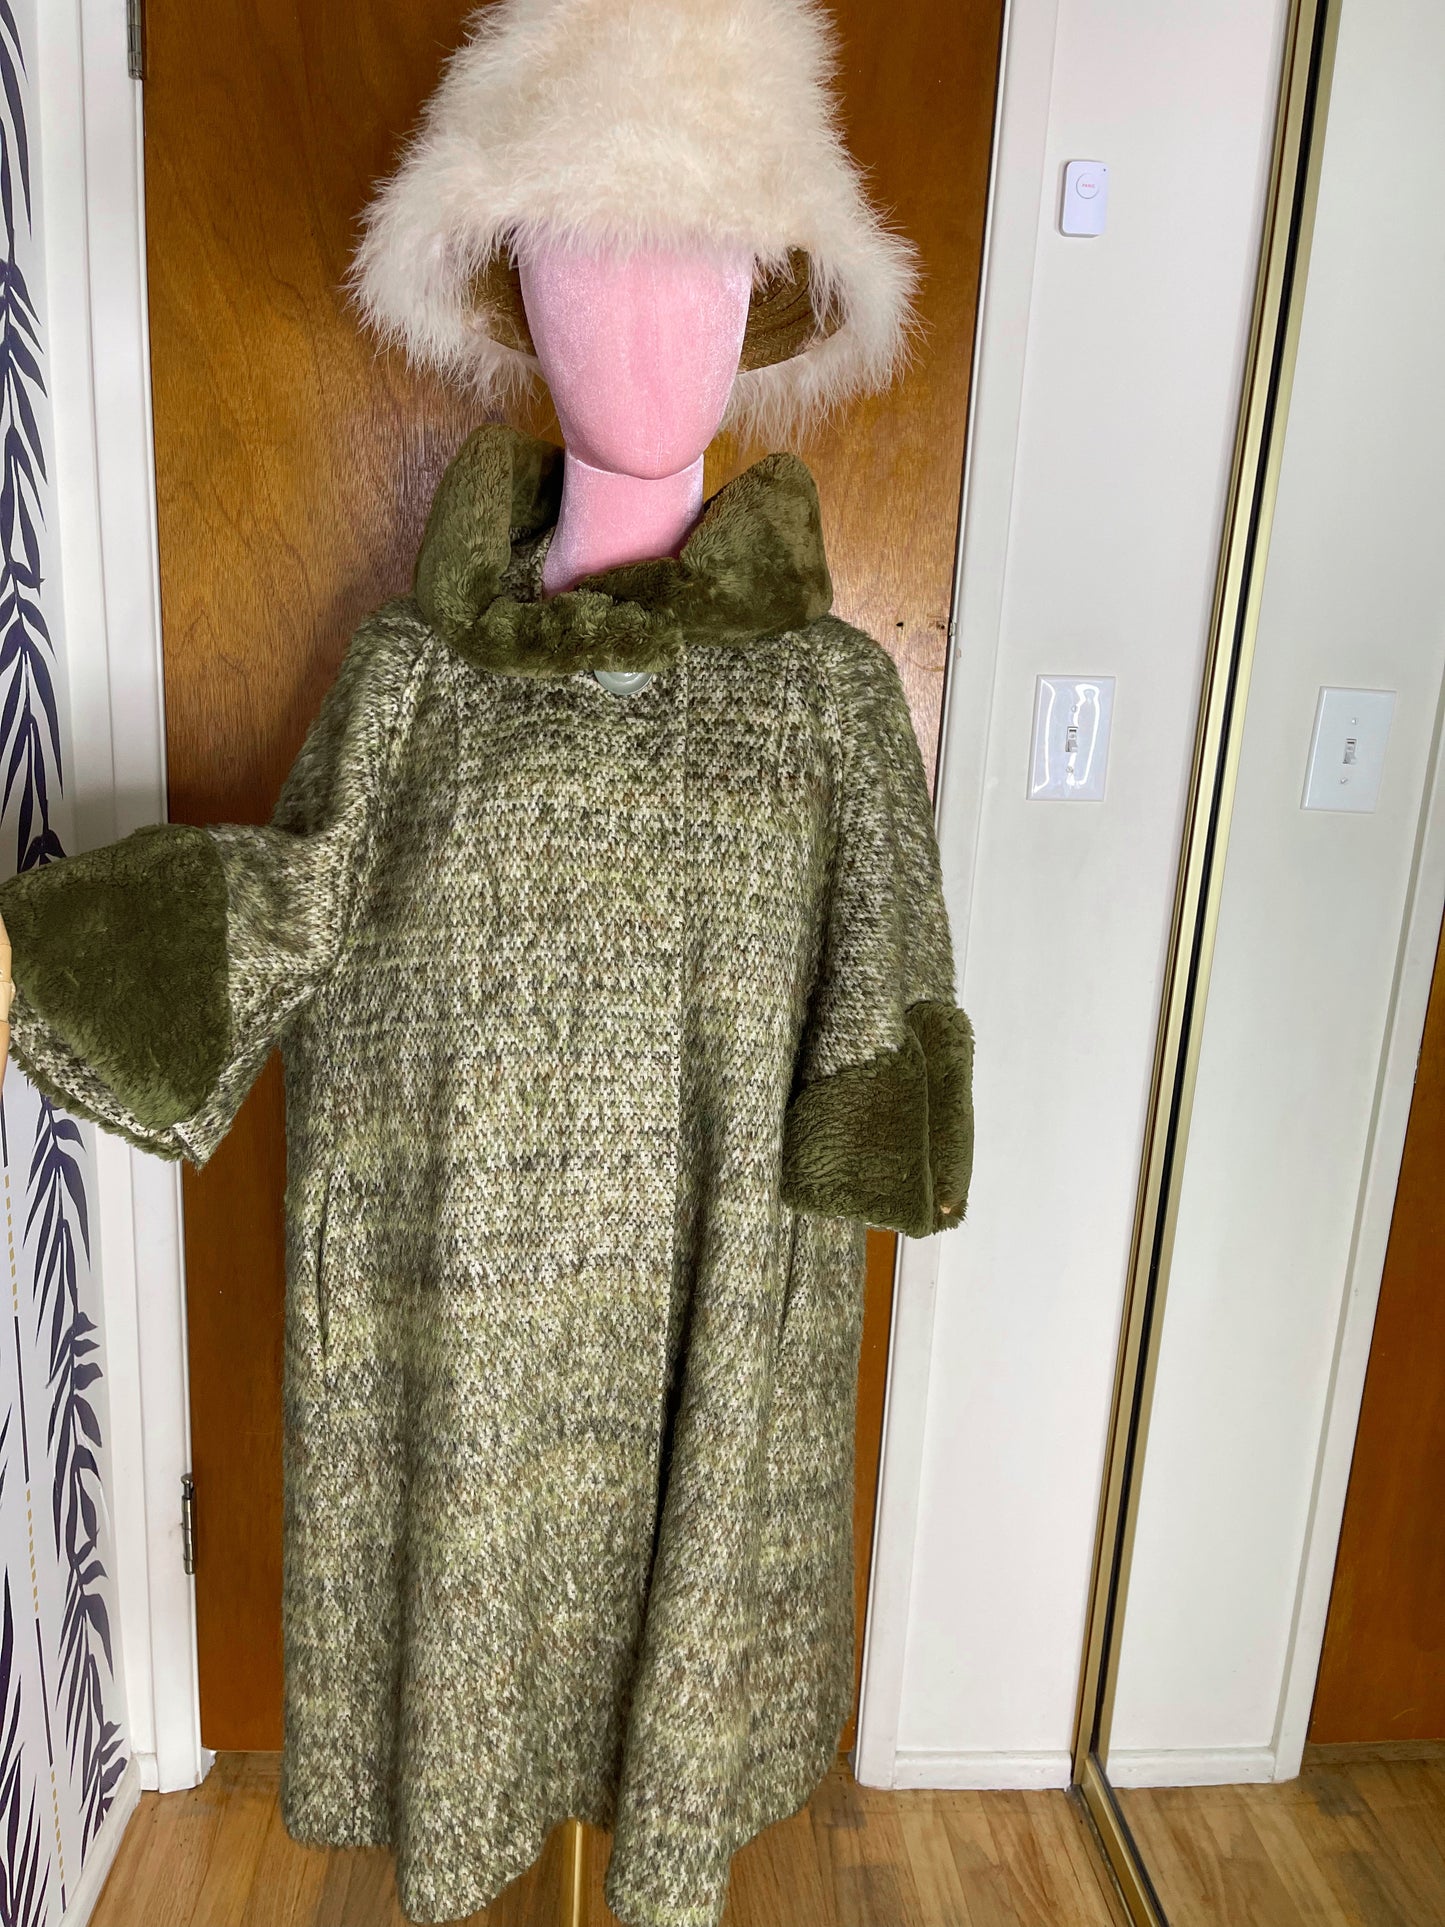 Vintage 50s 60s Avocado Green Tweed Coat One Size Fits Most